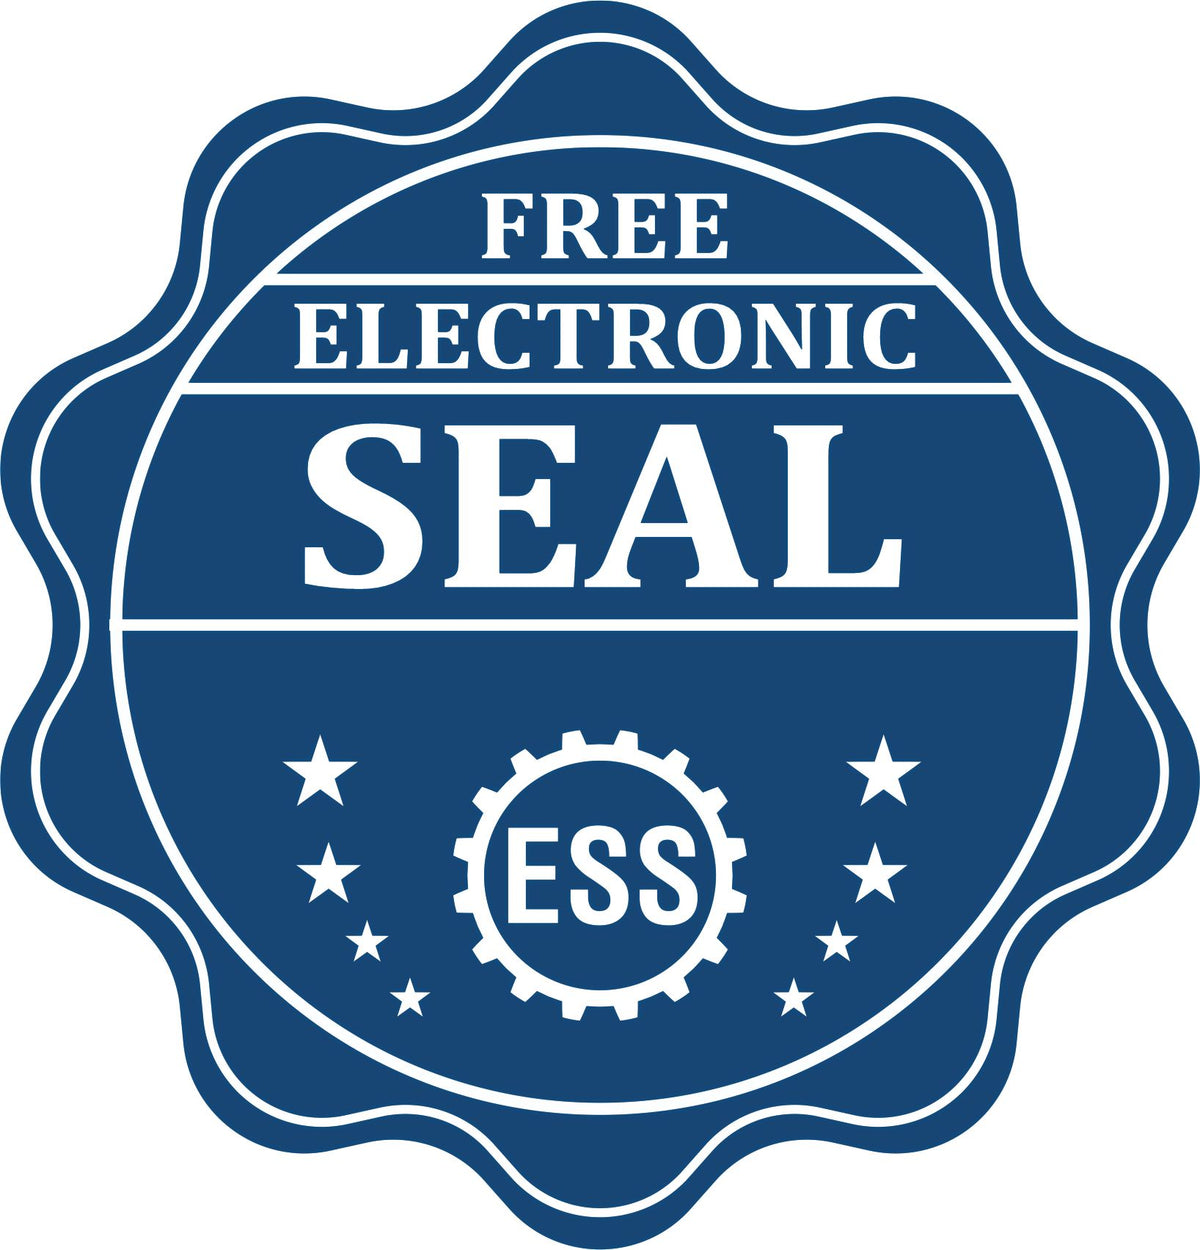 A badge showing a free electronic seal for the Handheld Arkansas Land Surveyor Seal with stars and the ESS gear on the emblem.